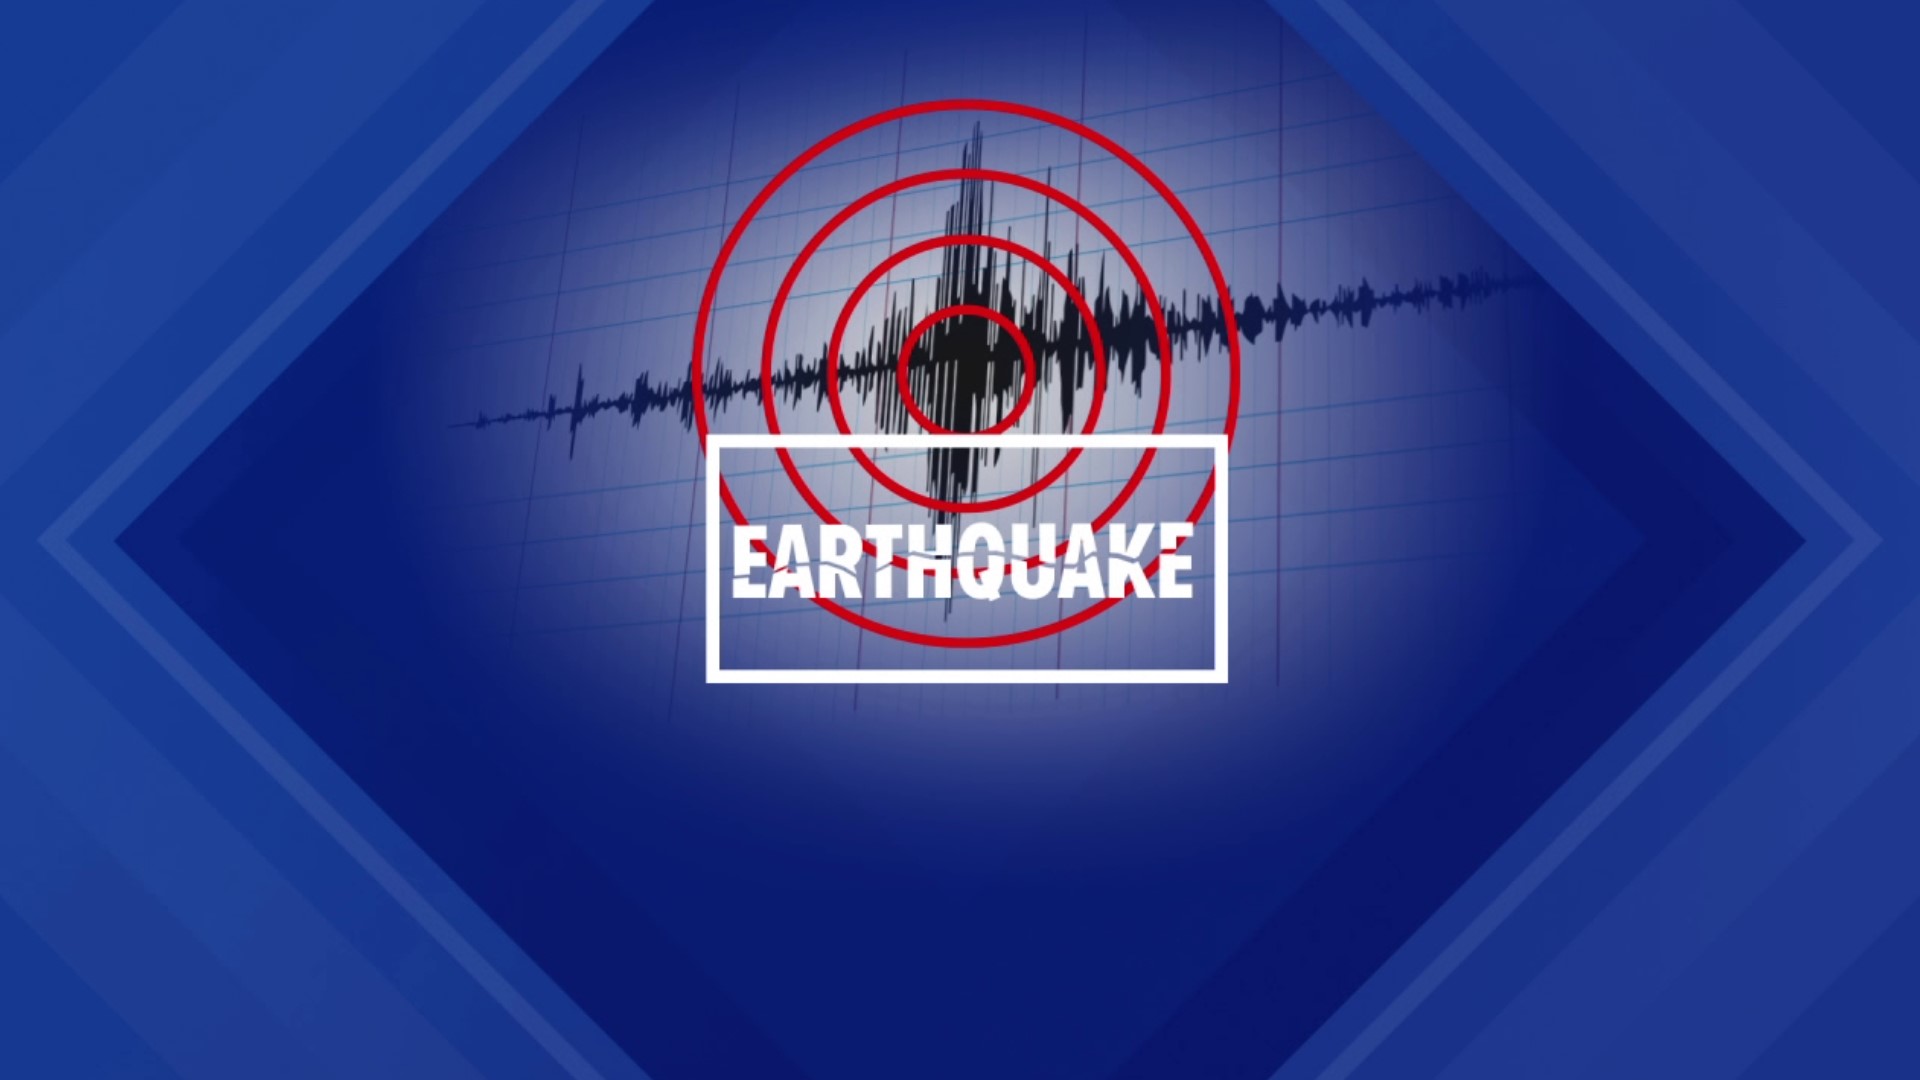 According to the United States Geological Survey, a 2.4 magnitude earthquake was confirmed on Friday afternoon in Spring Township.